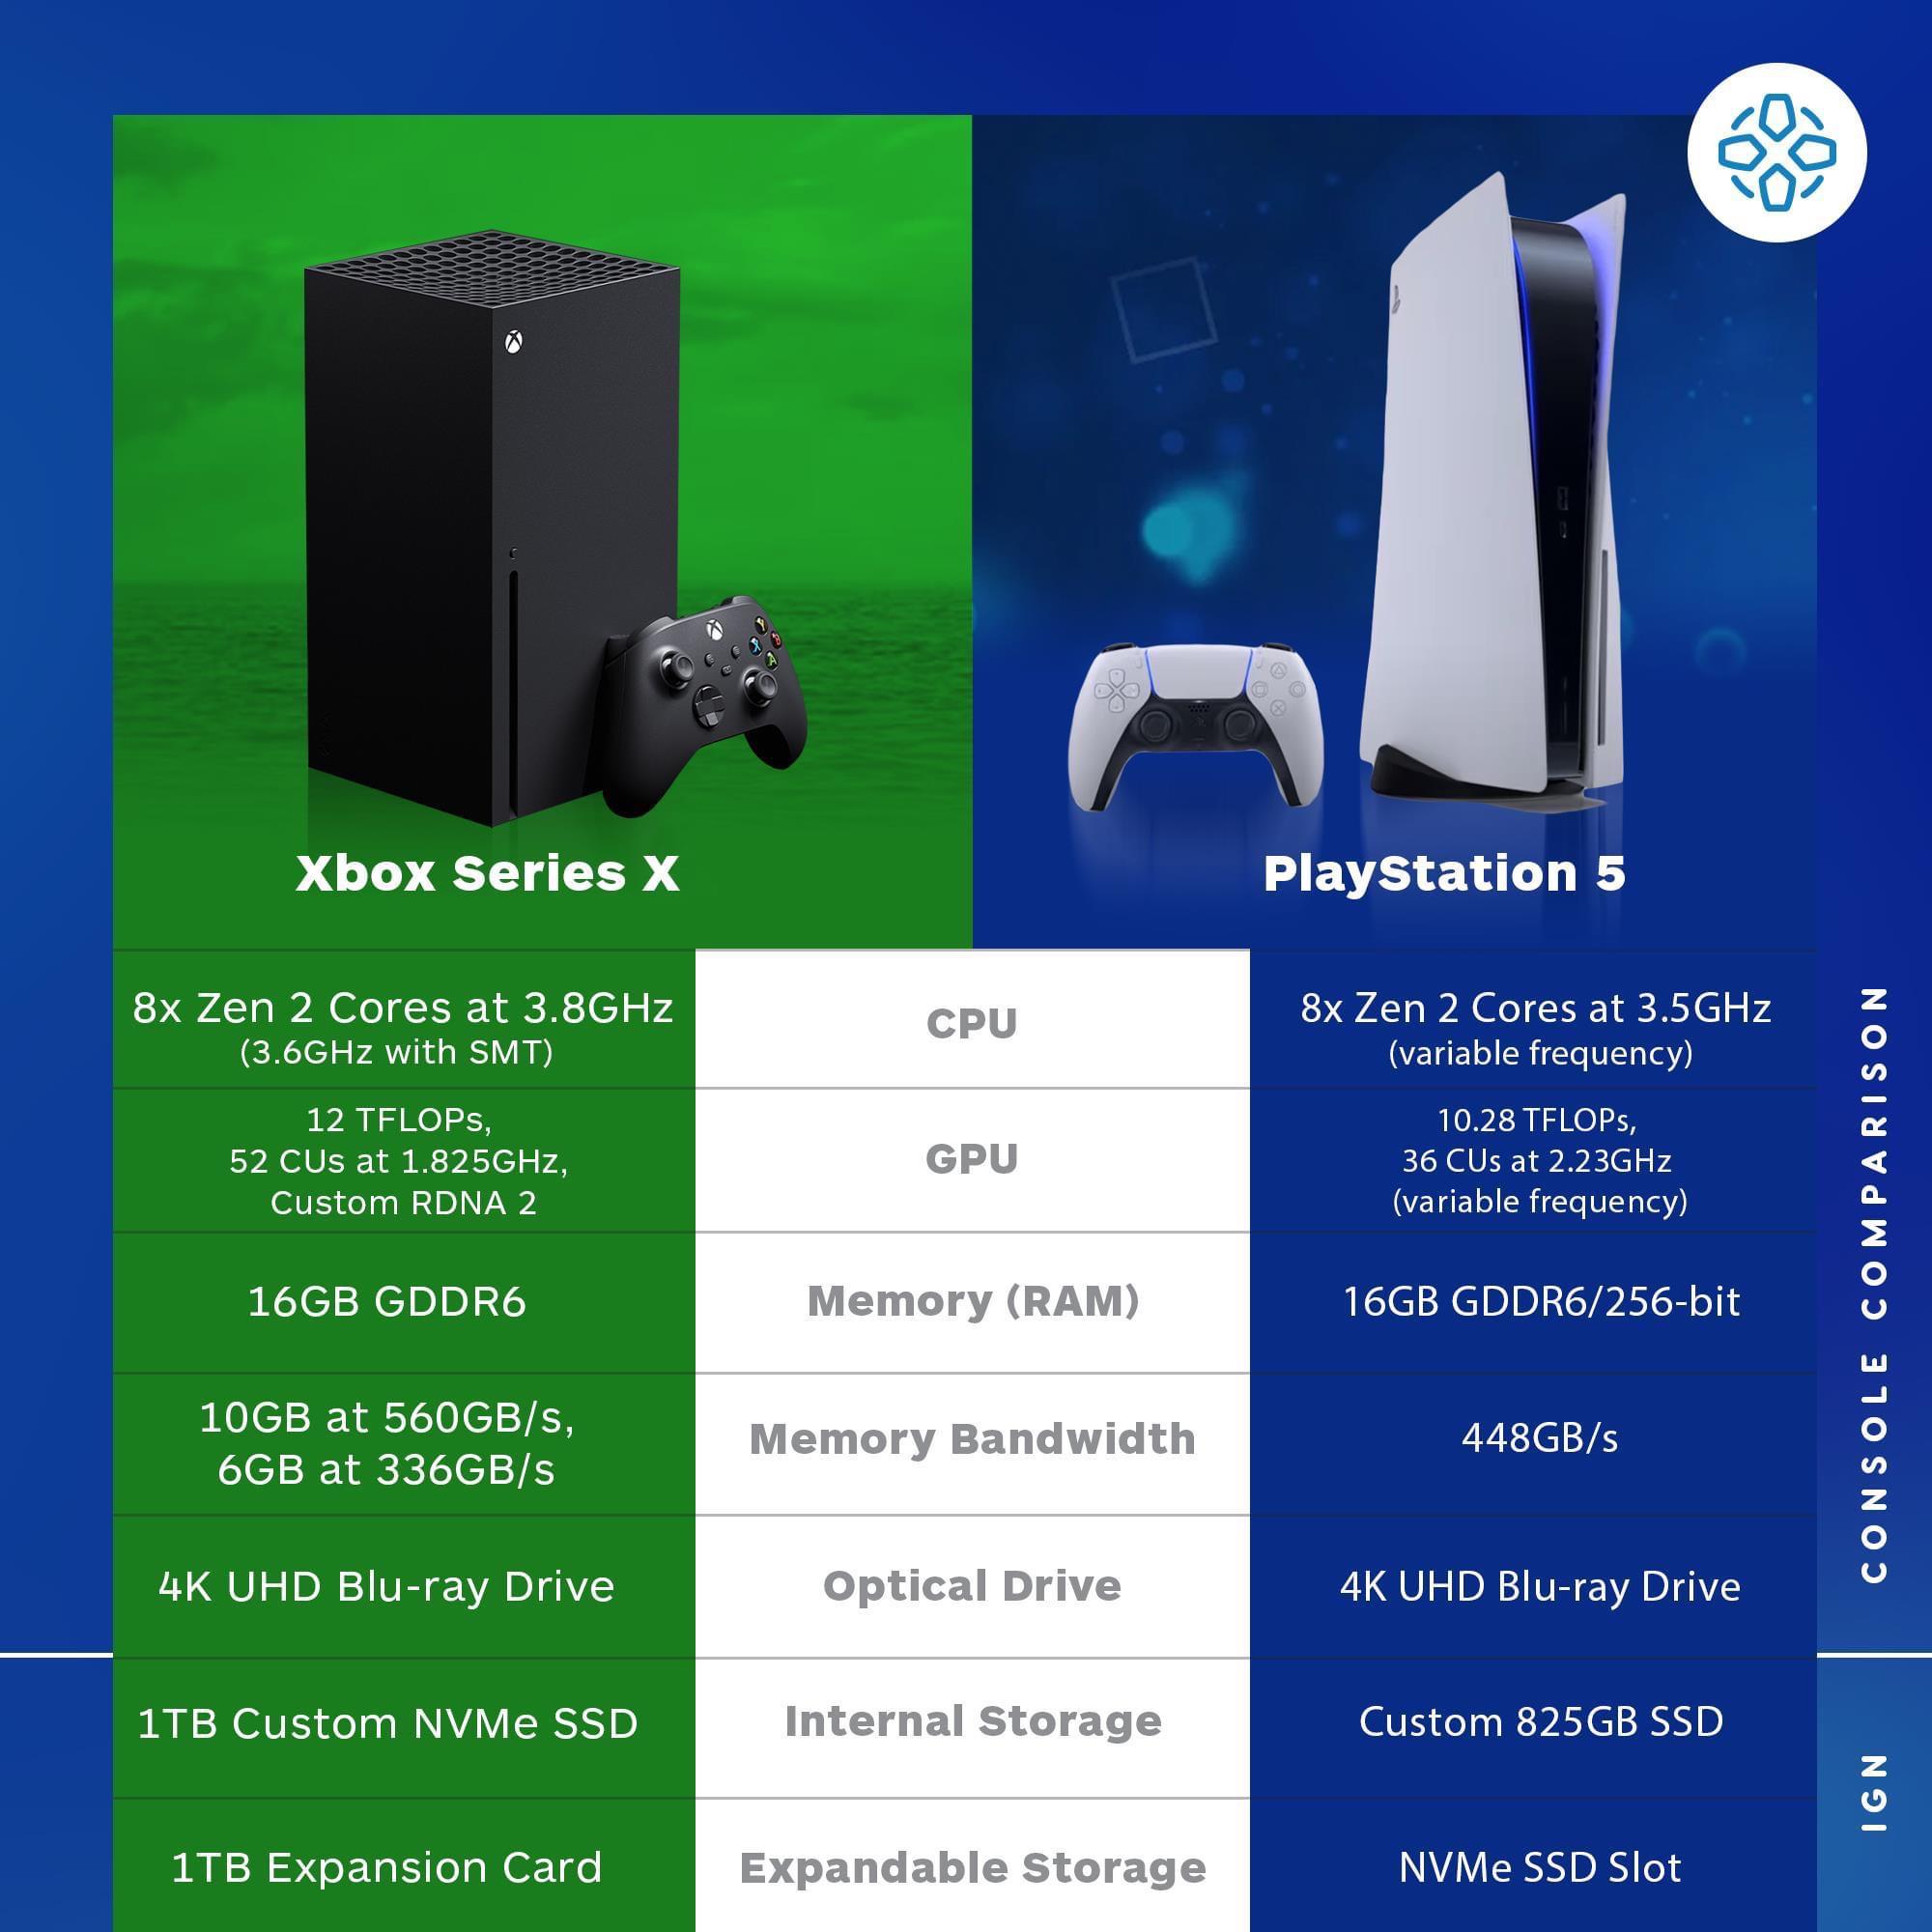 PS5 vs. Xbox Series X: Which Should You Buy?